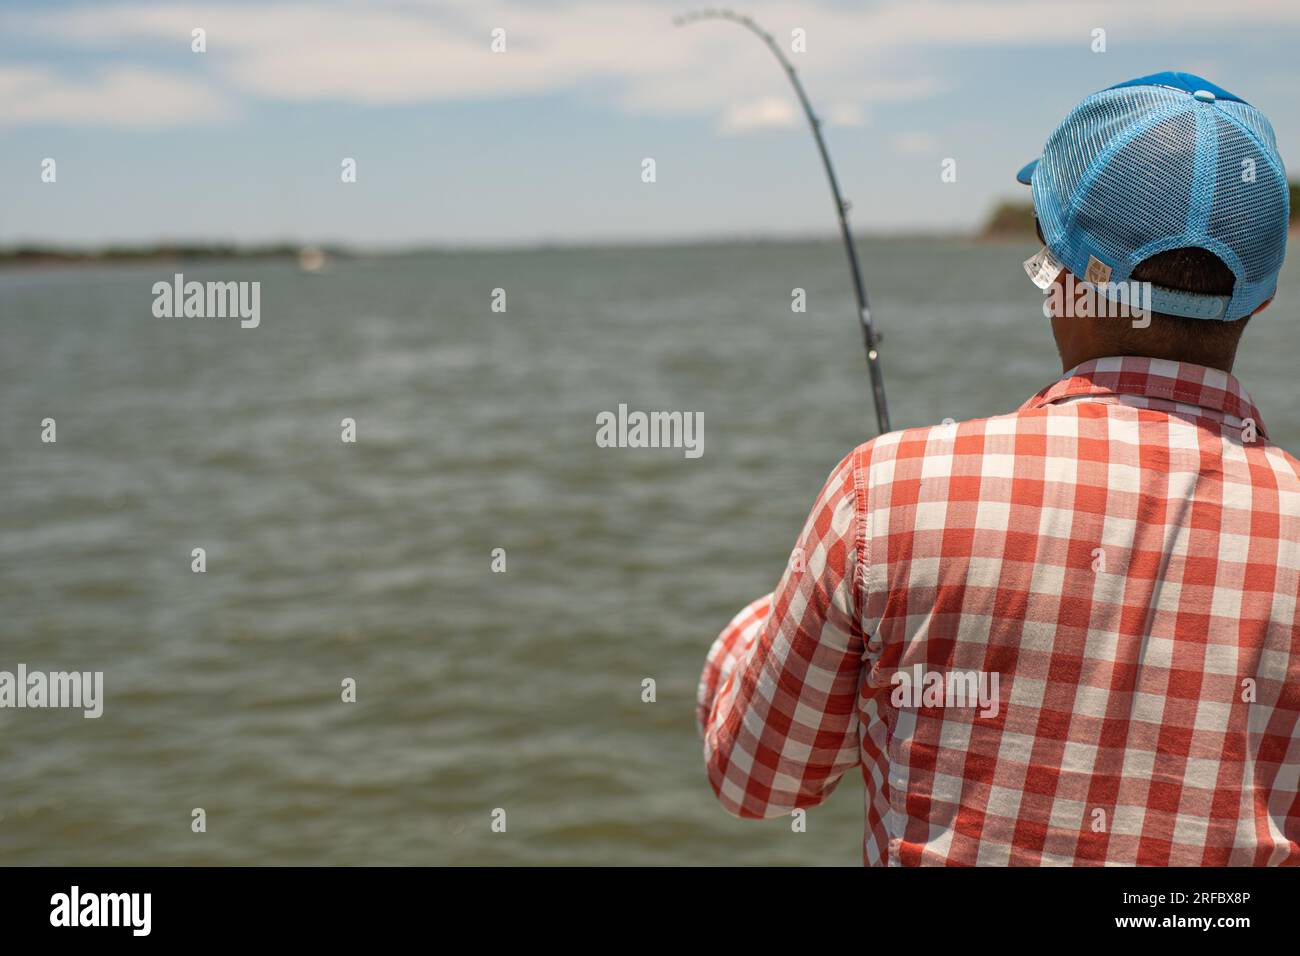 Grown white man holding a fishing rod on a fishing day. Stock Photo